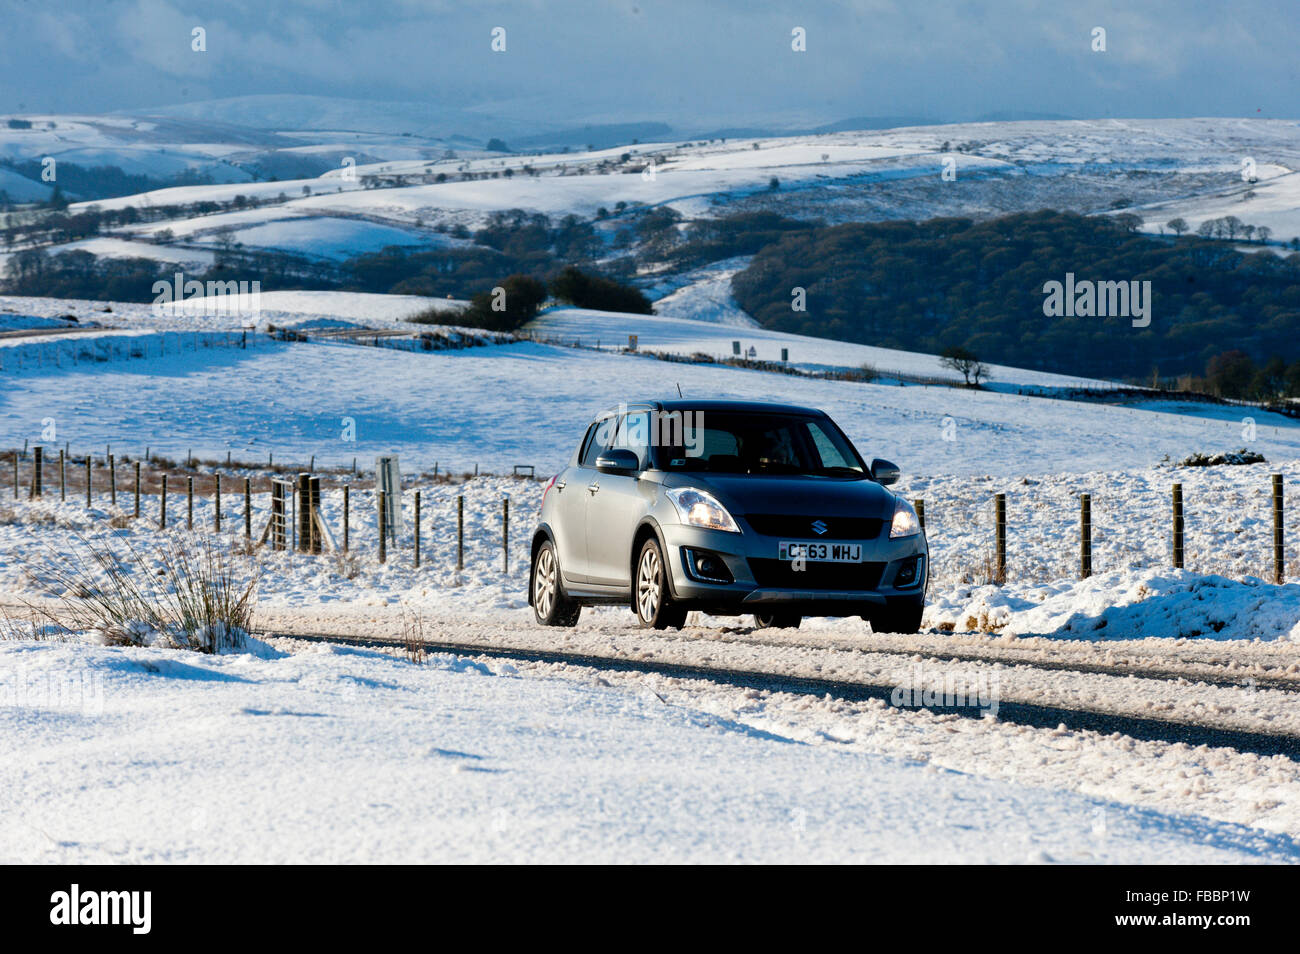 Builth  Wells, Powys, Wales, UK. 14th January, 2016. UK weather. Motorists drive through a winter landscape on the'Brecon Road' between Builth Wells and Brecon.About 5cm of snow fell last night on the high moorland of the Mynydd Epynt, near Builth Wells, Powys, Wales. Credit:  Graham M. Lawrence/Alamy Live News. Stock Photo